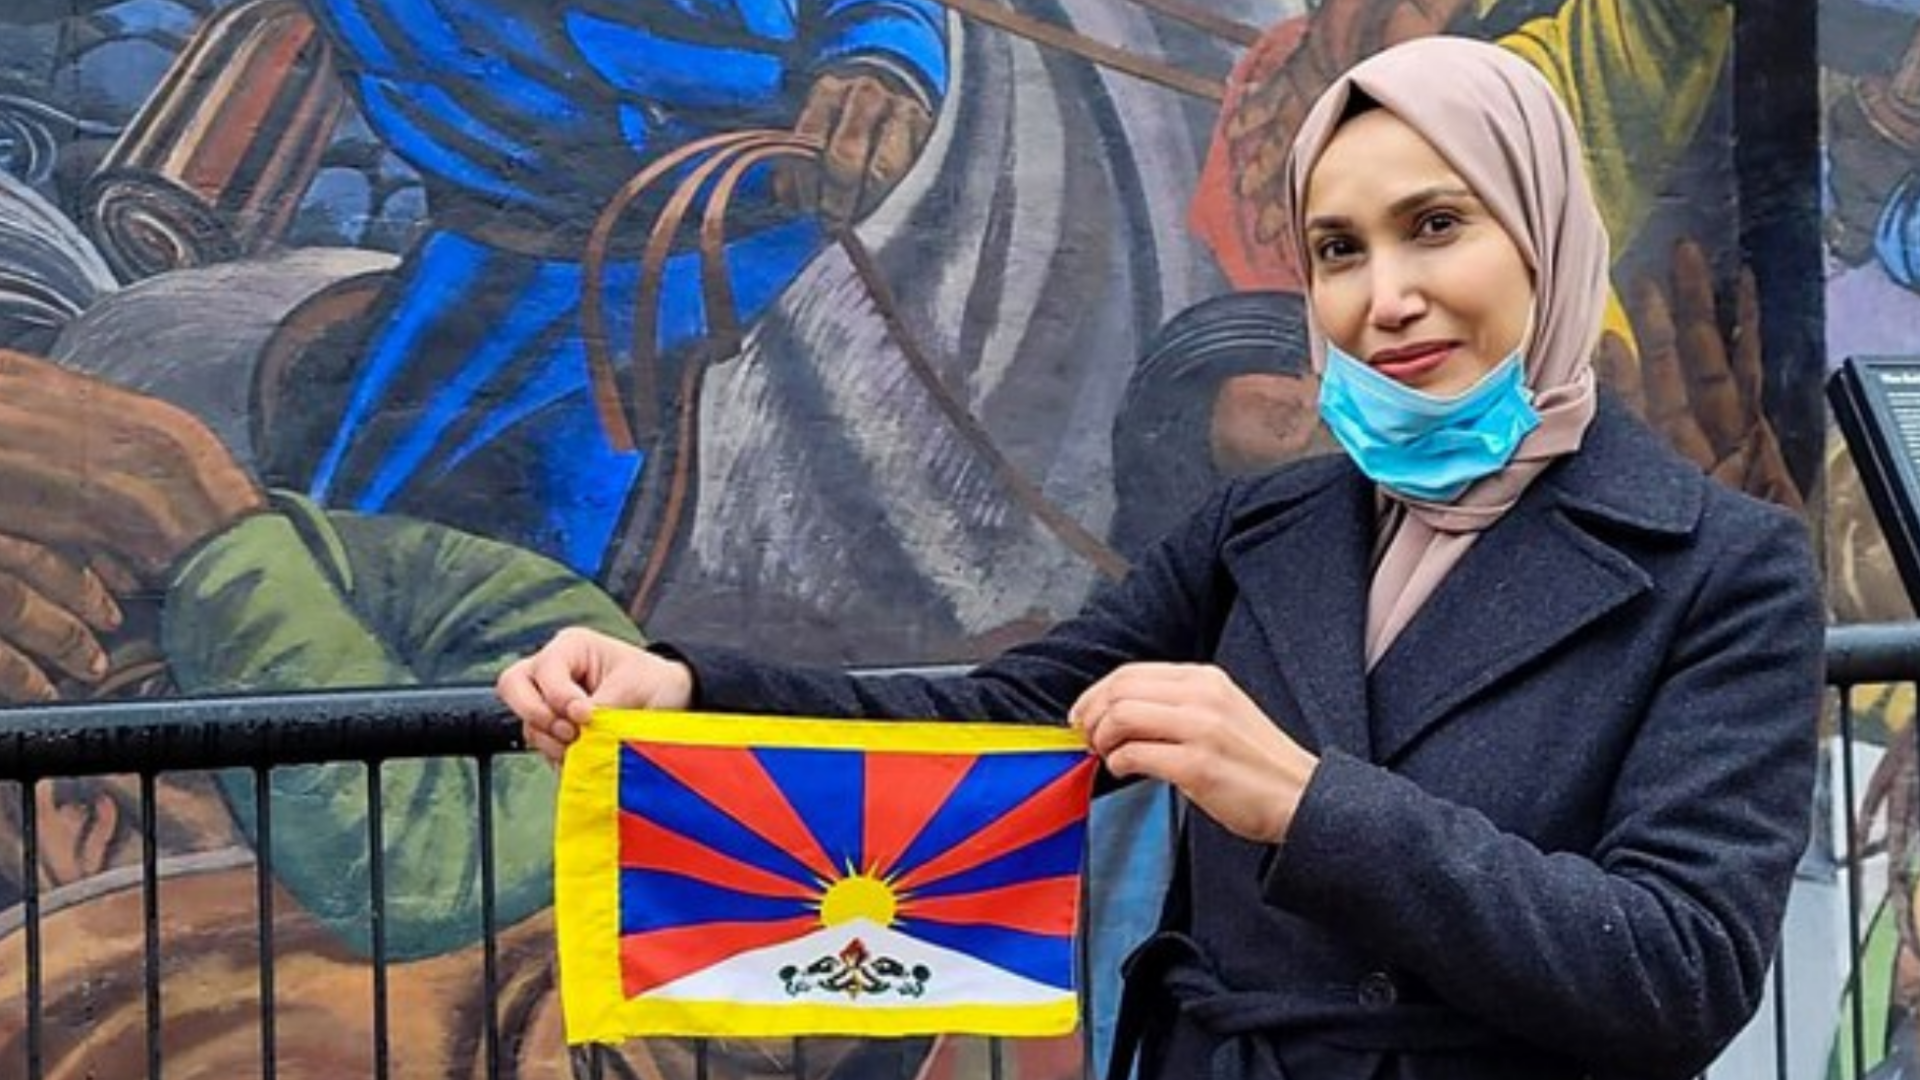 Councillor Rabina Khan holding the Tibetan flag at Cable Street, East London, on 10 March